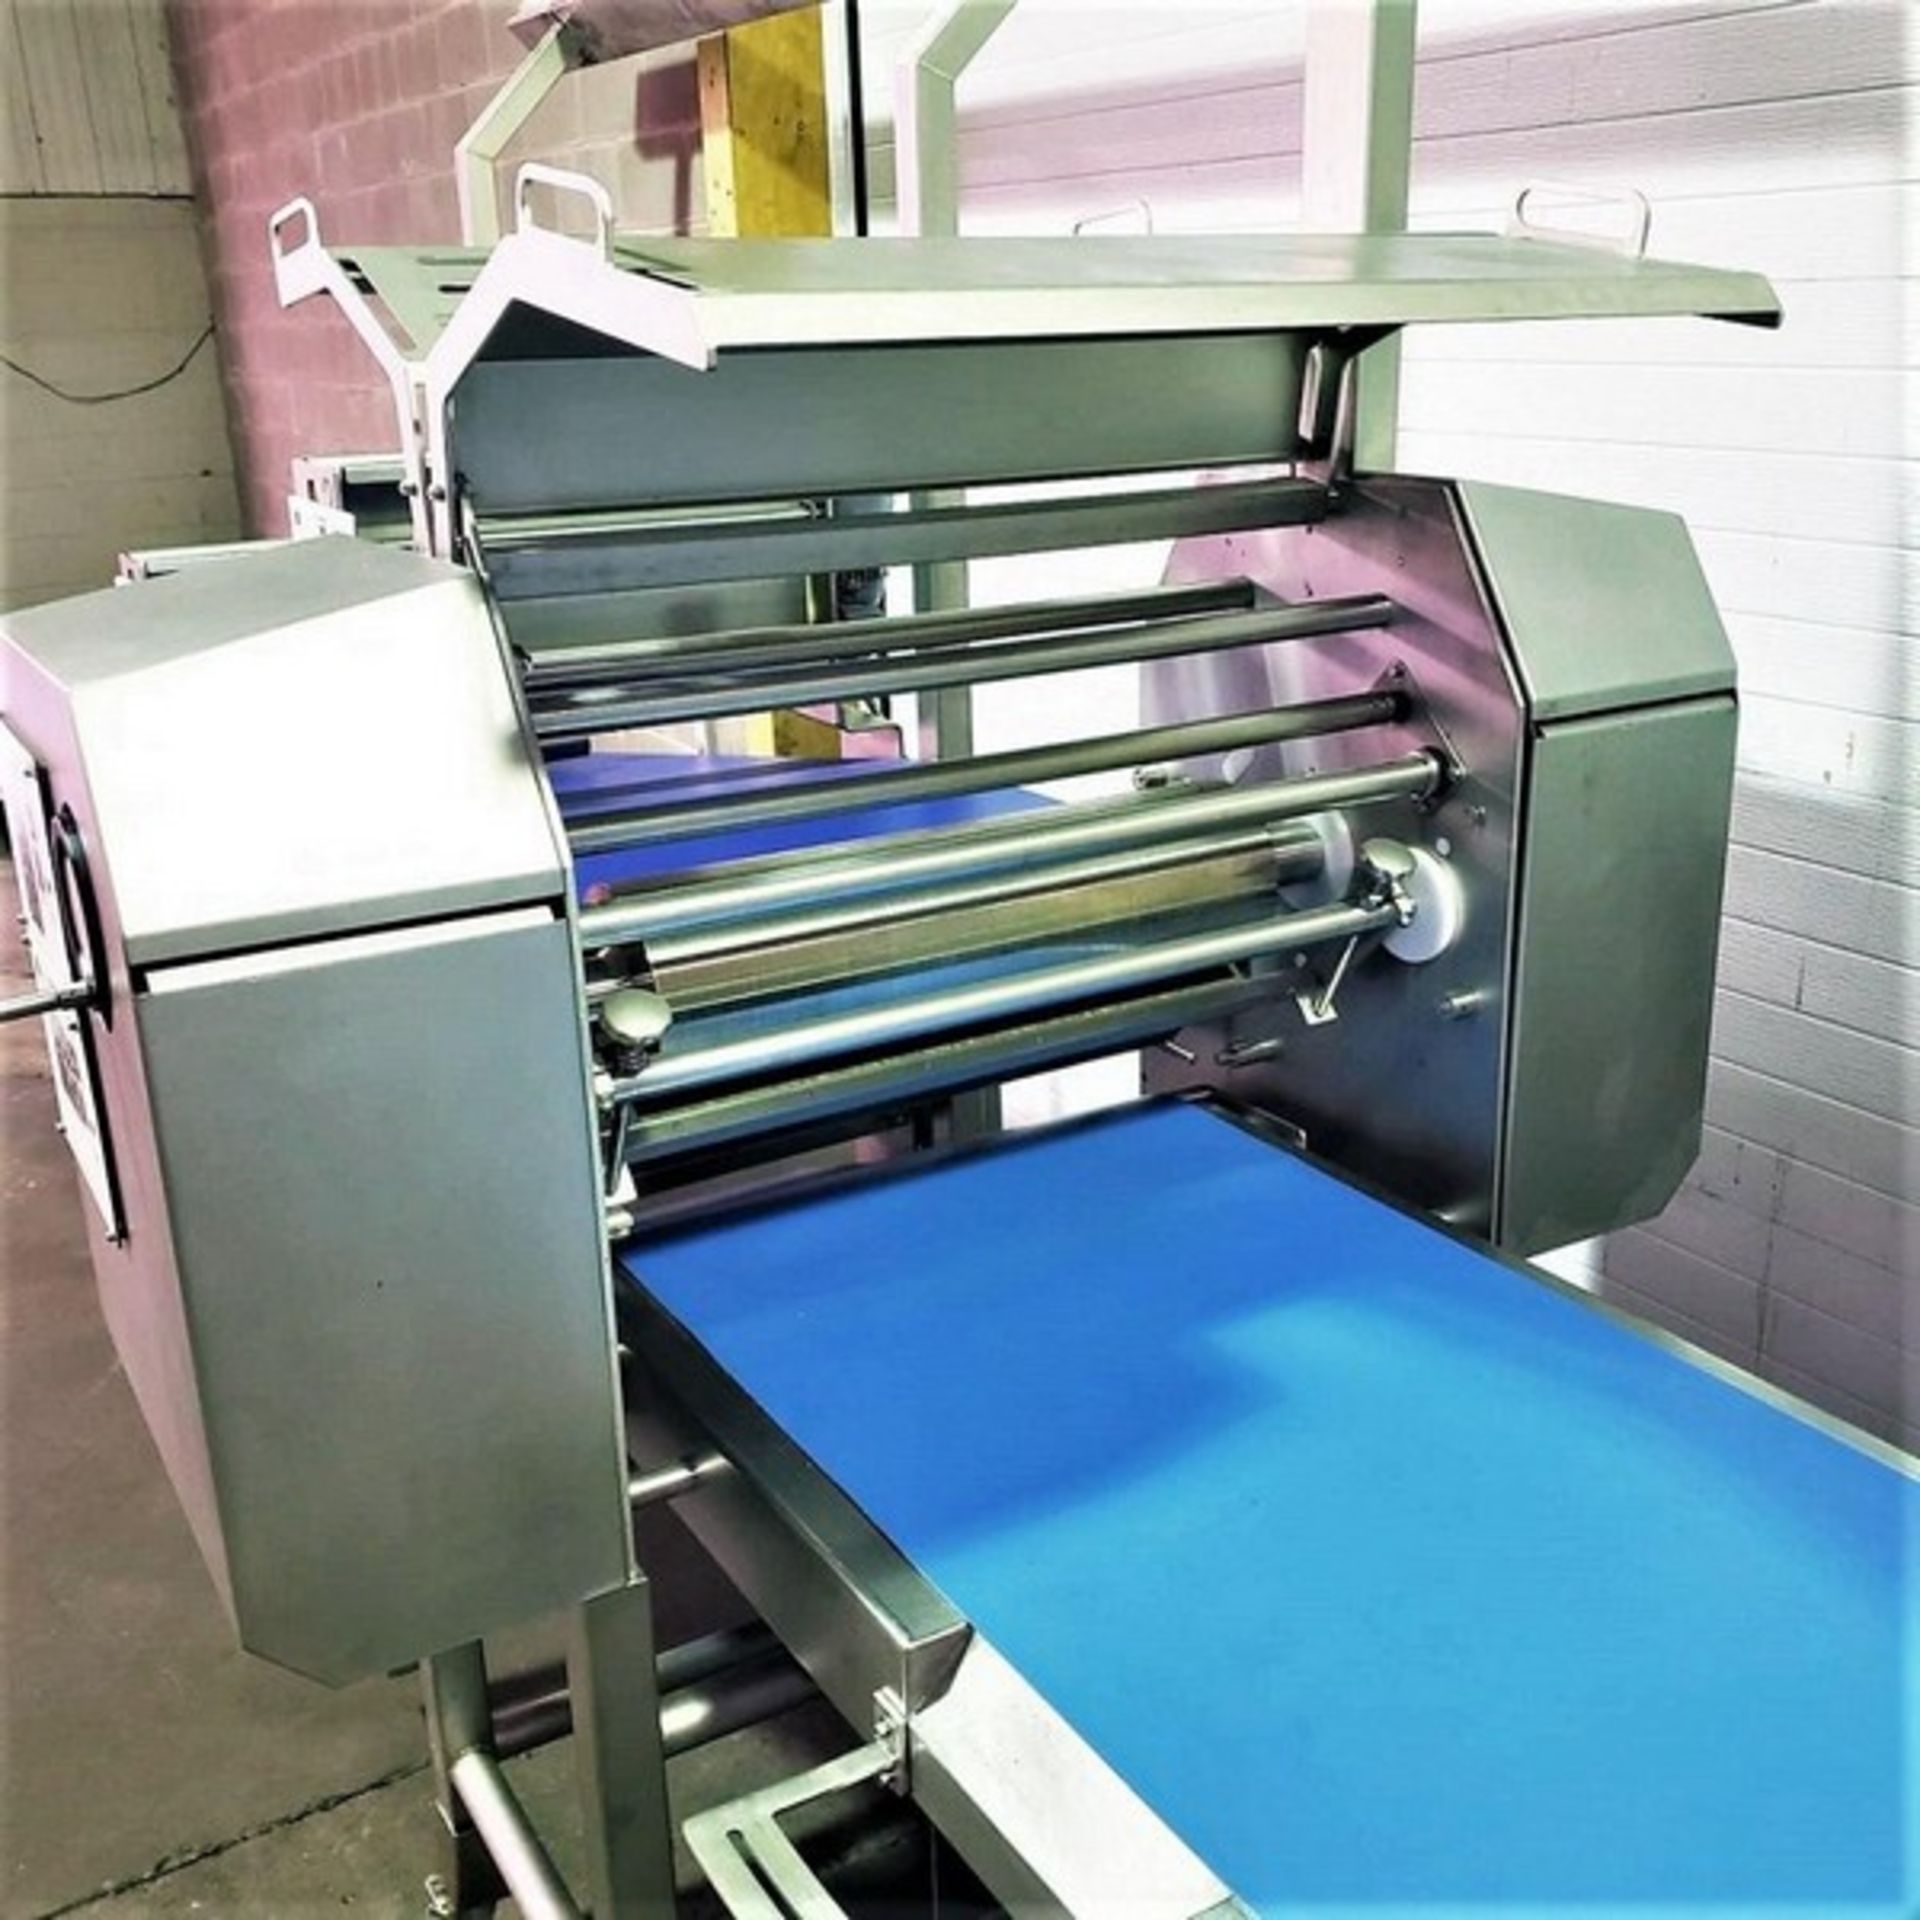 Tromp Bakery Line multi-purpose S/S Combines Dough and Flour Depositin, With Roller Sheeting, Fold - Image 4 of 11